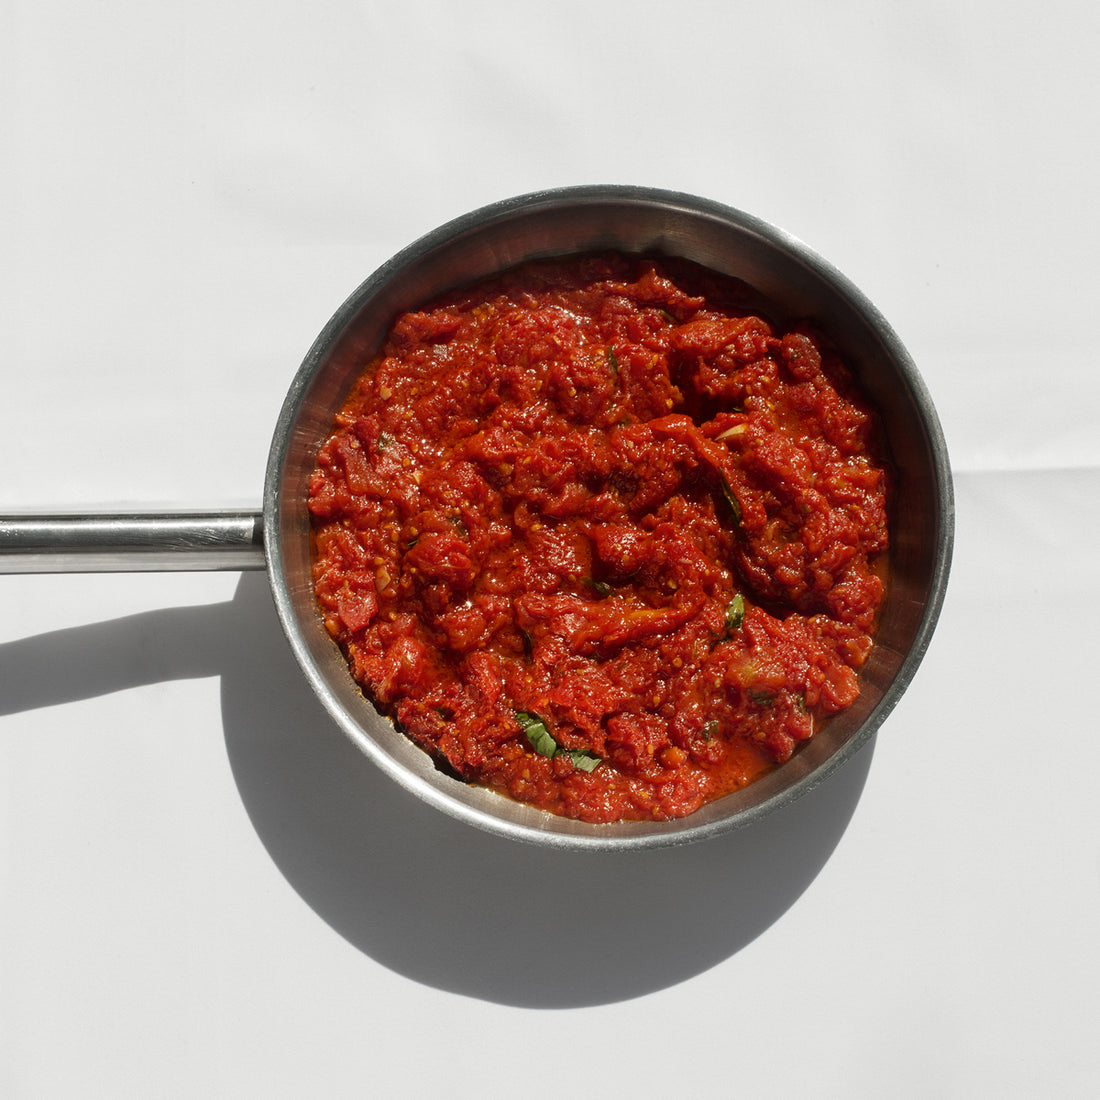 Slow-cooked Tomato Sauce